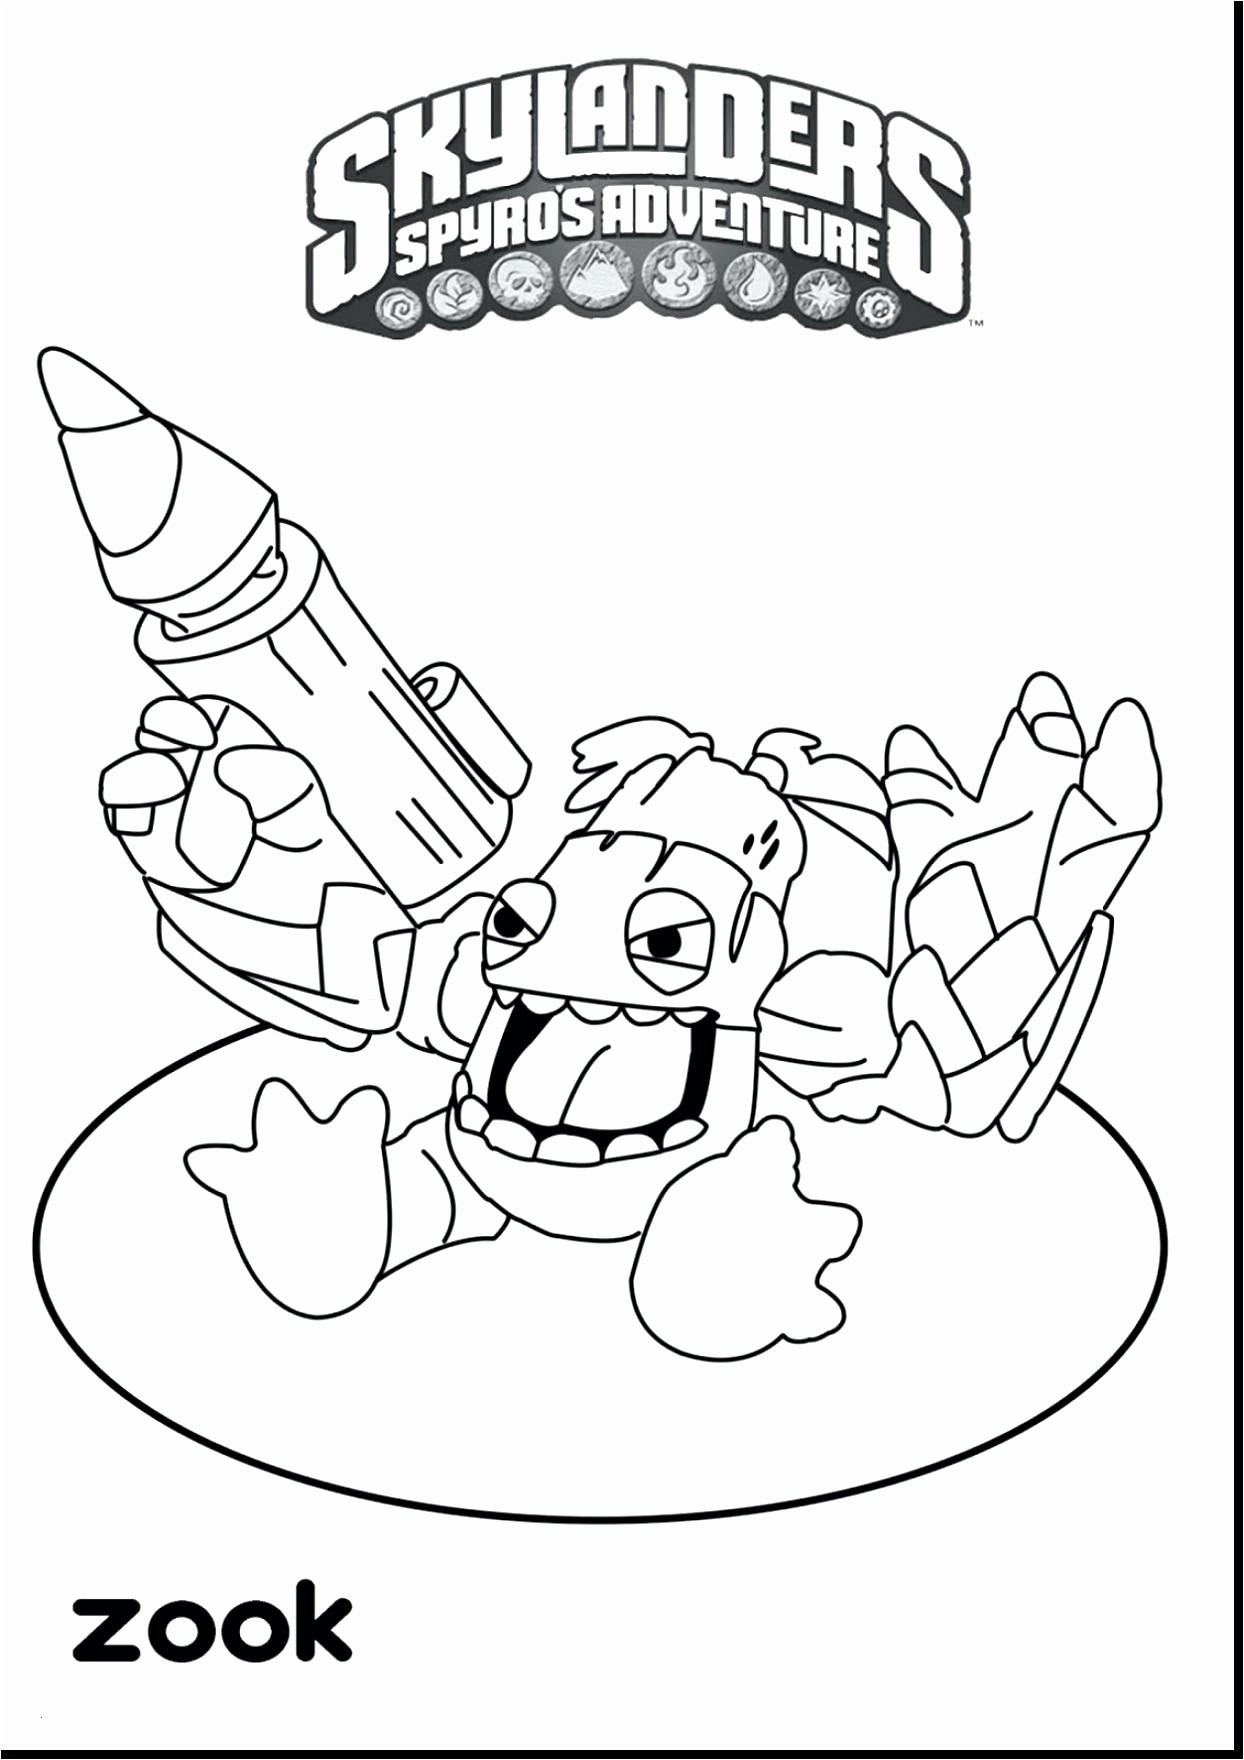 Coloring Pages Teacher Coloring Pages For The Best Teacher Thank You Grid Worksheets